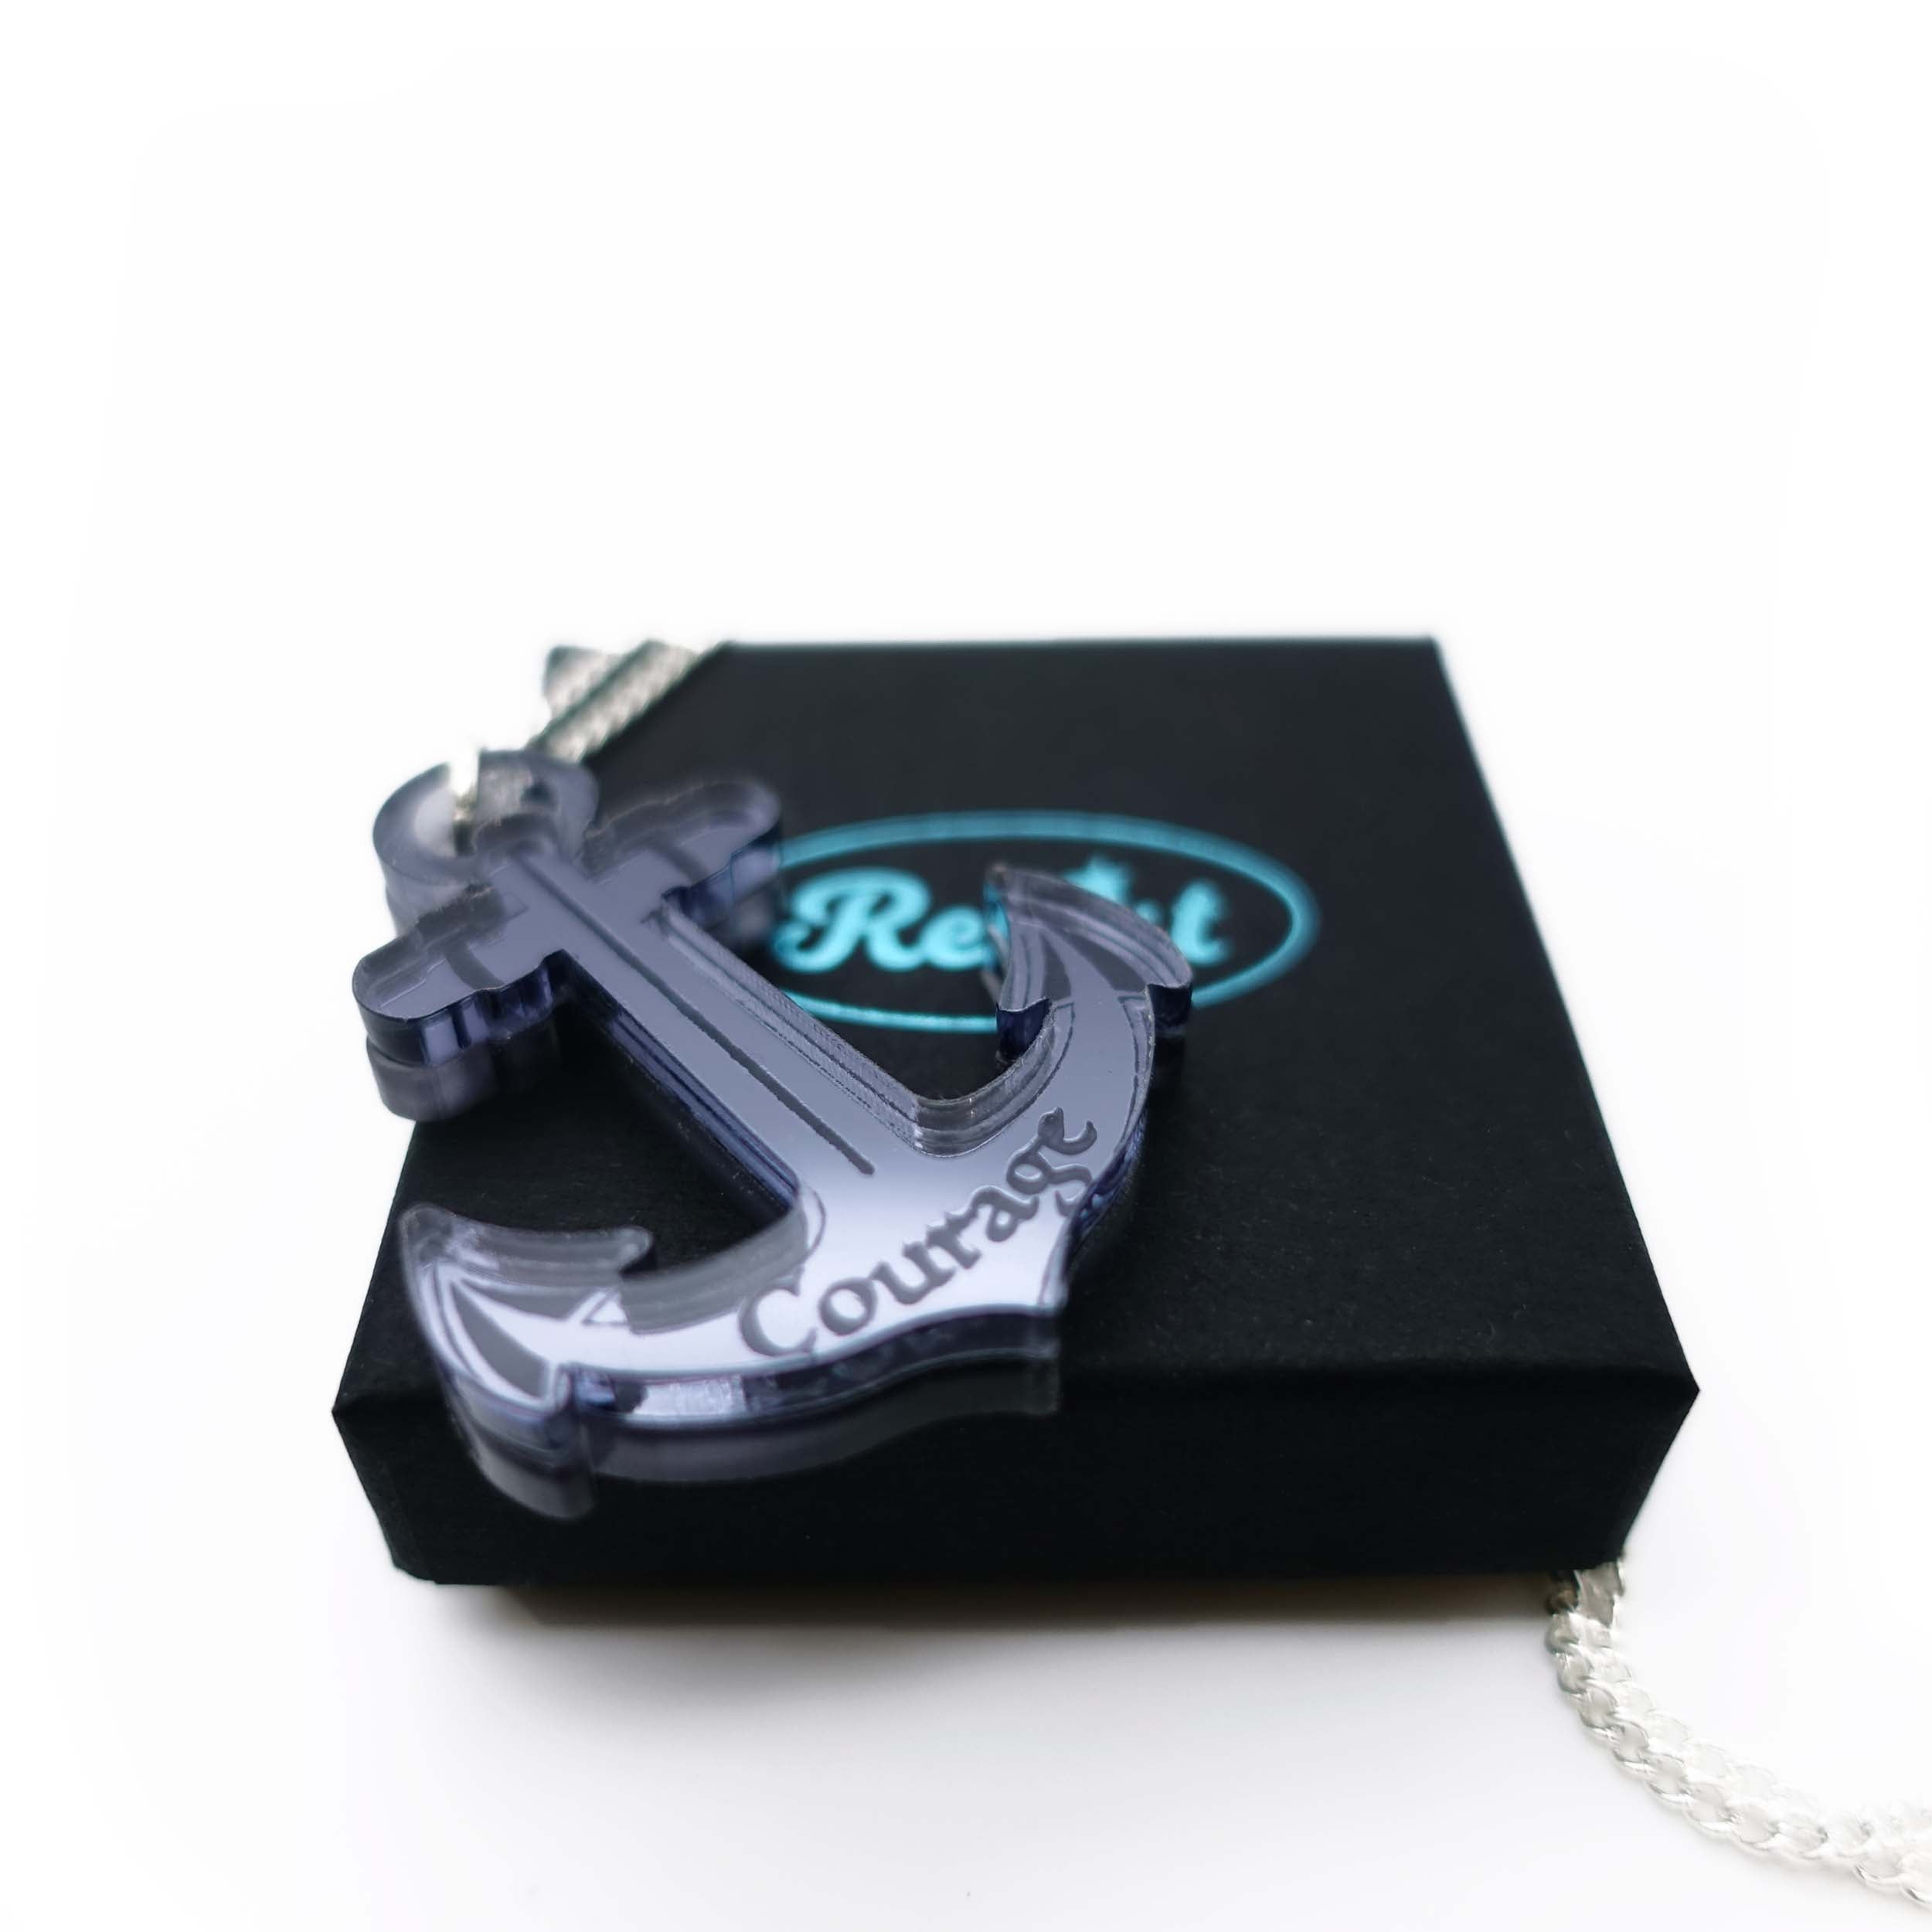 Slate mirror engraved courage anchor pendant shown on the small gift box. £4 from the sale of each will be split equally between the RNLI and Women for Refugee Women. 